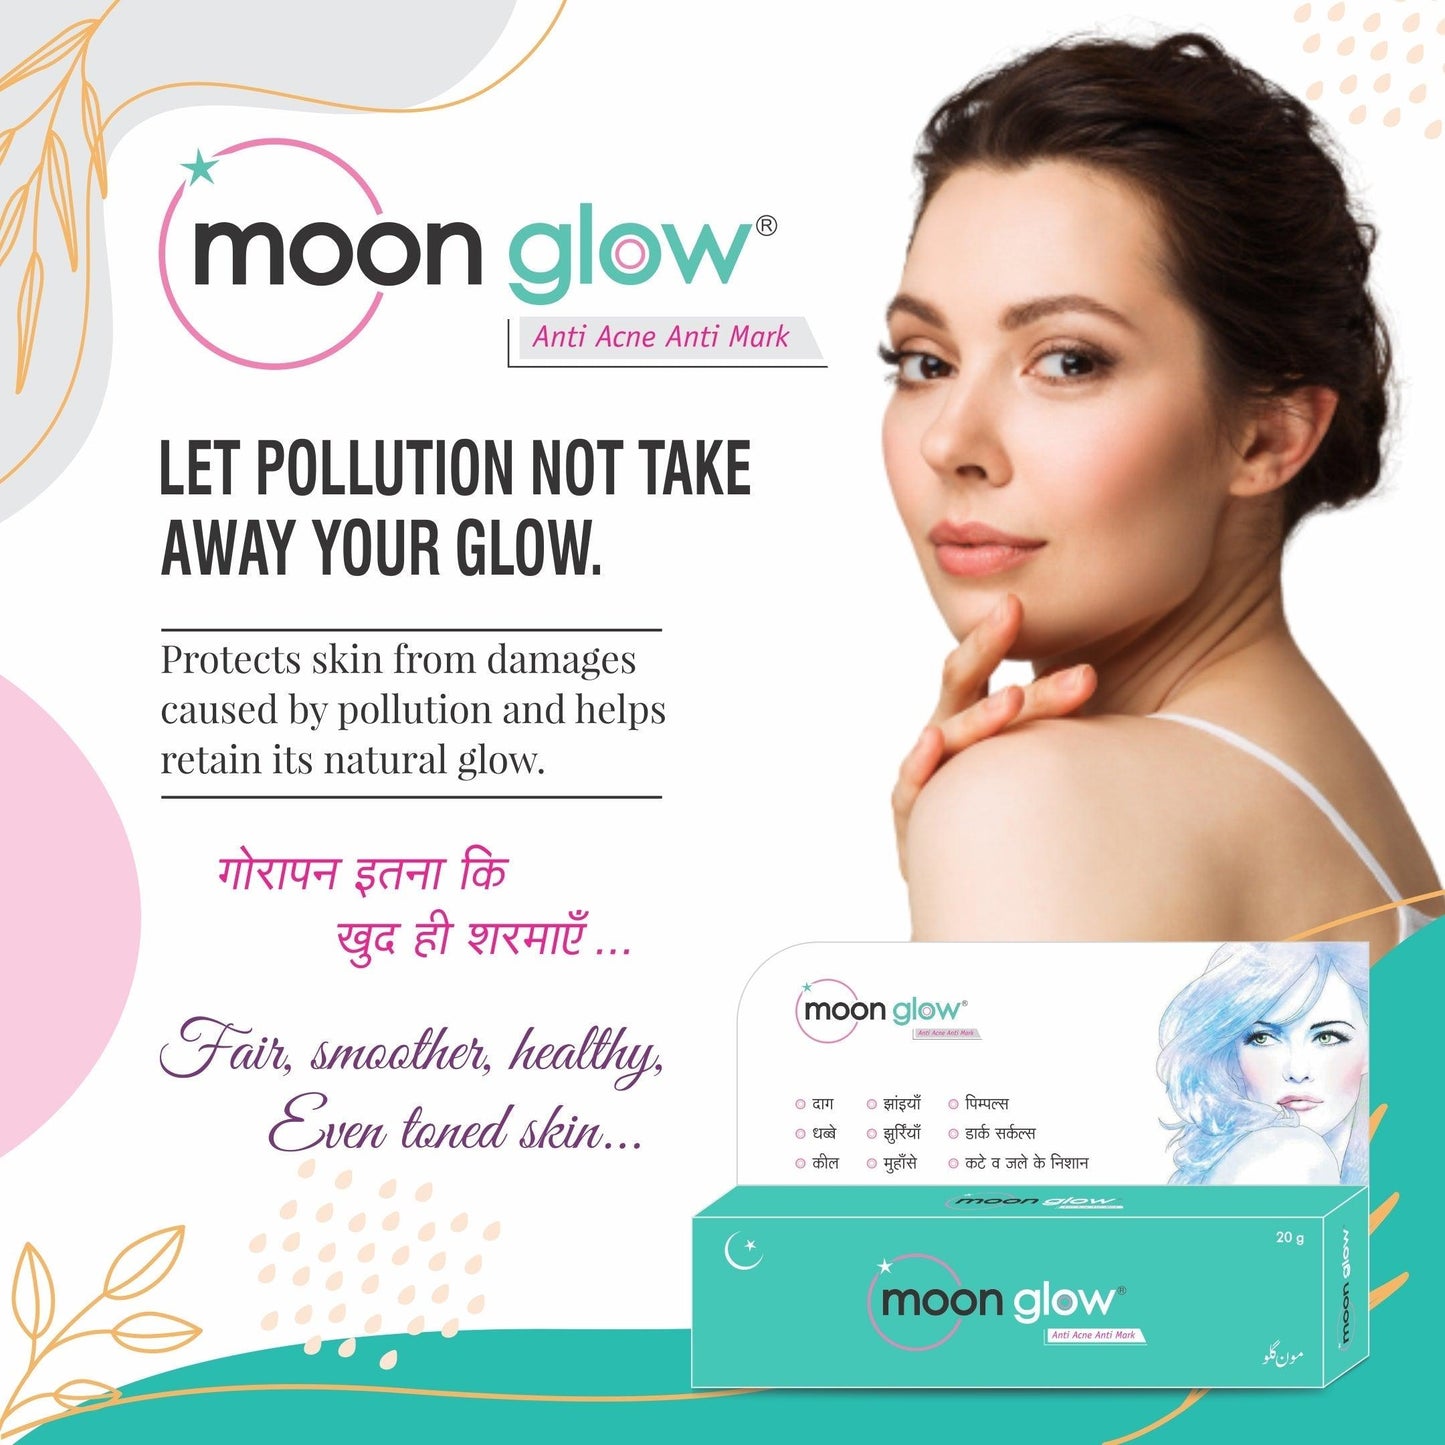 Moon Glow Cream & Pearl Face Wash for Acne, Pimples, Black Spots, Dark Circles, Stretch Marks, Anti-Aging and Fairness (2 Cream + 2 Pearl Face Wash) - Olefia Biopharma Limited